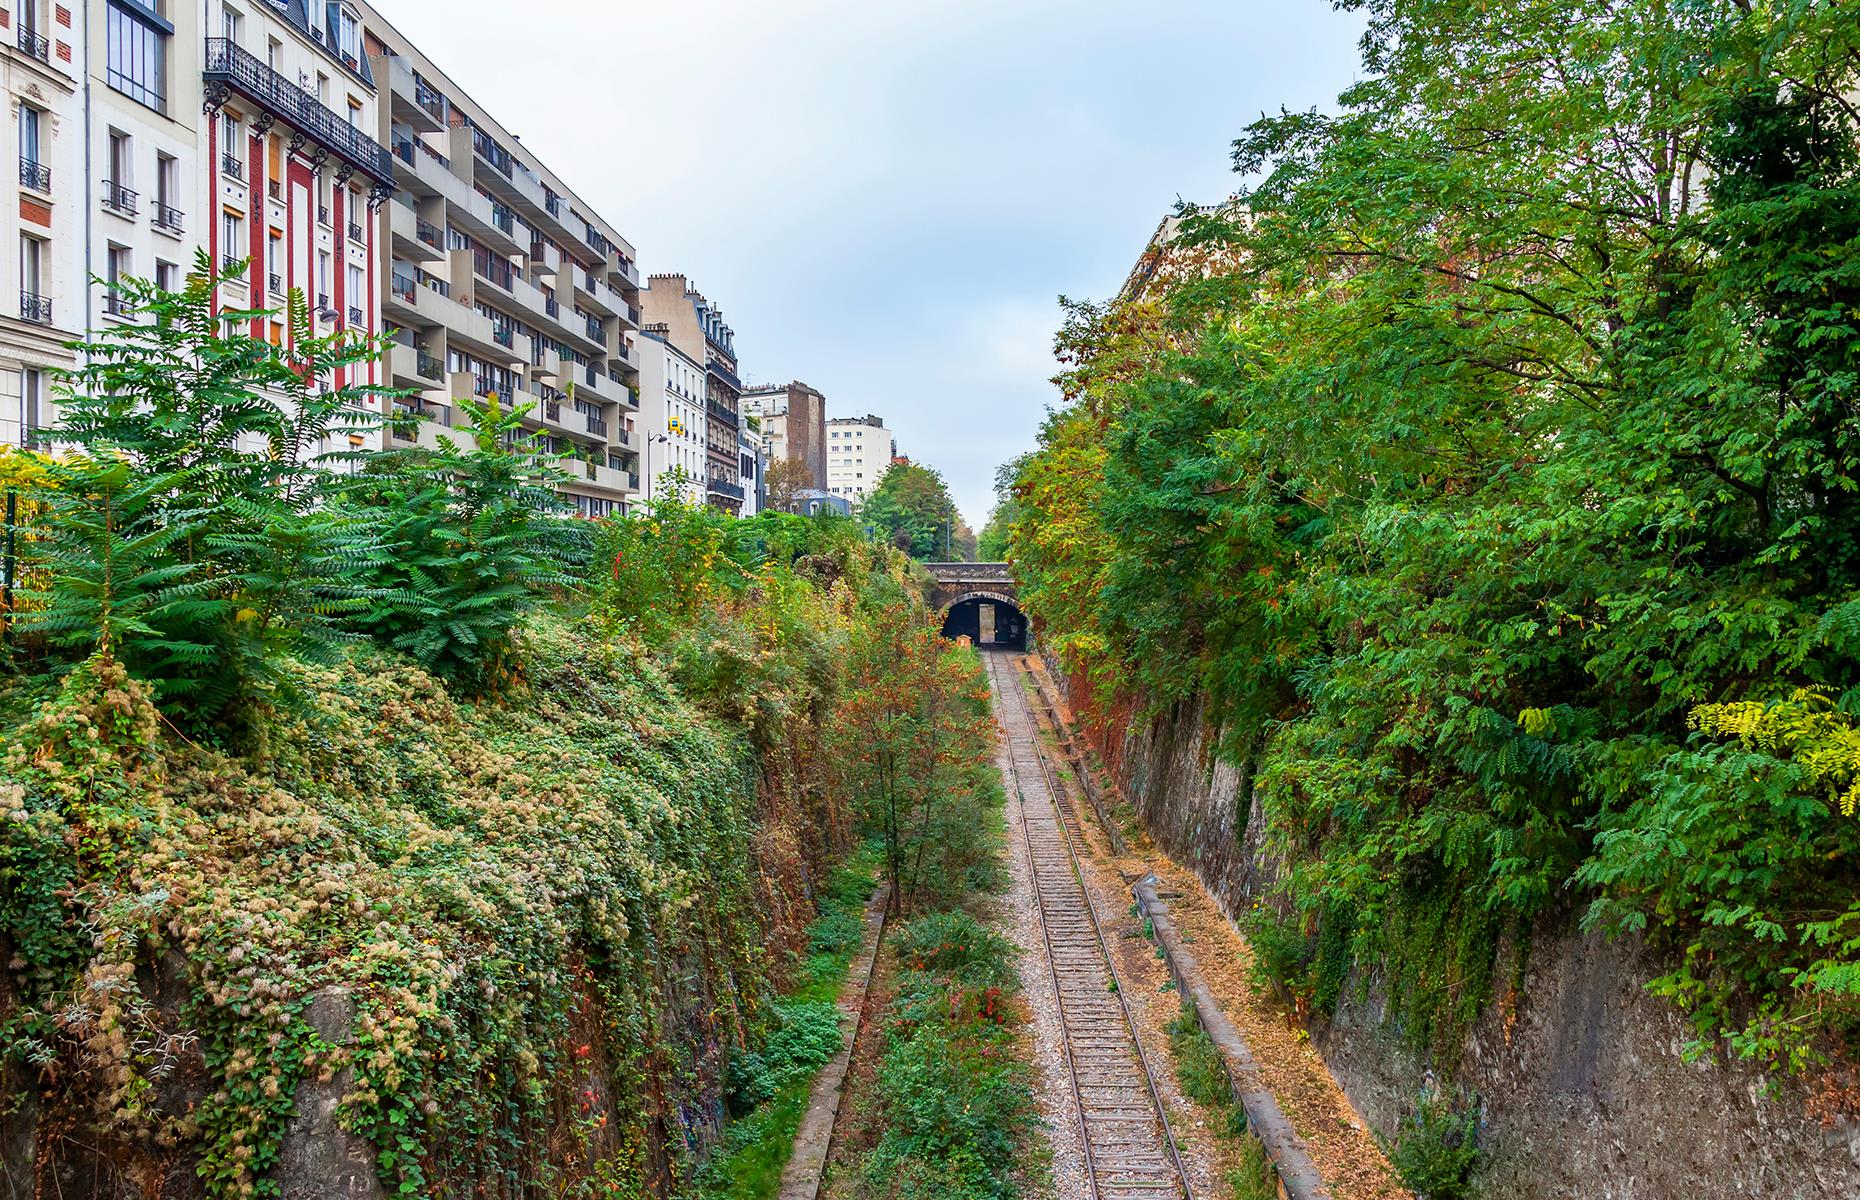 <p>Once a busy railway line, Paris's Petite Ceinture fell out of use and was abandoned in the 1930s. It hasn't been forgotten, though. The deserted railway tracks have since been transformed with walking paths, nature trails and gardens, home to a huge variety of plants and animals. Visitors can typically enjoy a peaceful walk along the tracks, taking in graffitied walls rich with greenery and keeping an eye peeled for birds and butterflies. <a href="https://www.loveexploring.com/galleries/80934/last-stop-stunning-photos-of-abandoned-train-stations-around-the-world?page=1">Take a look at more abandoned train stations around the world here</a>.</p>